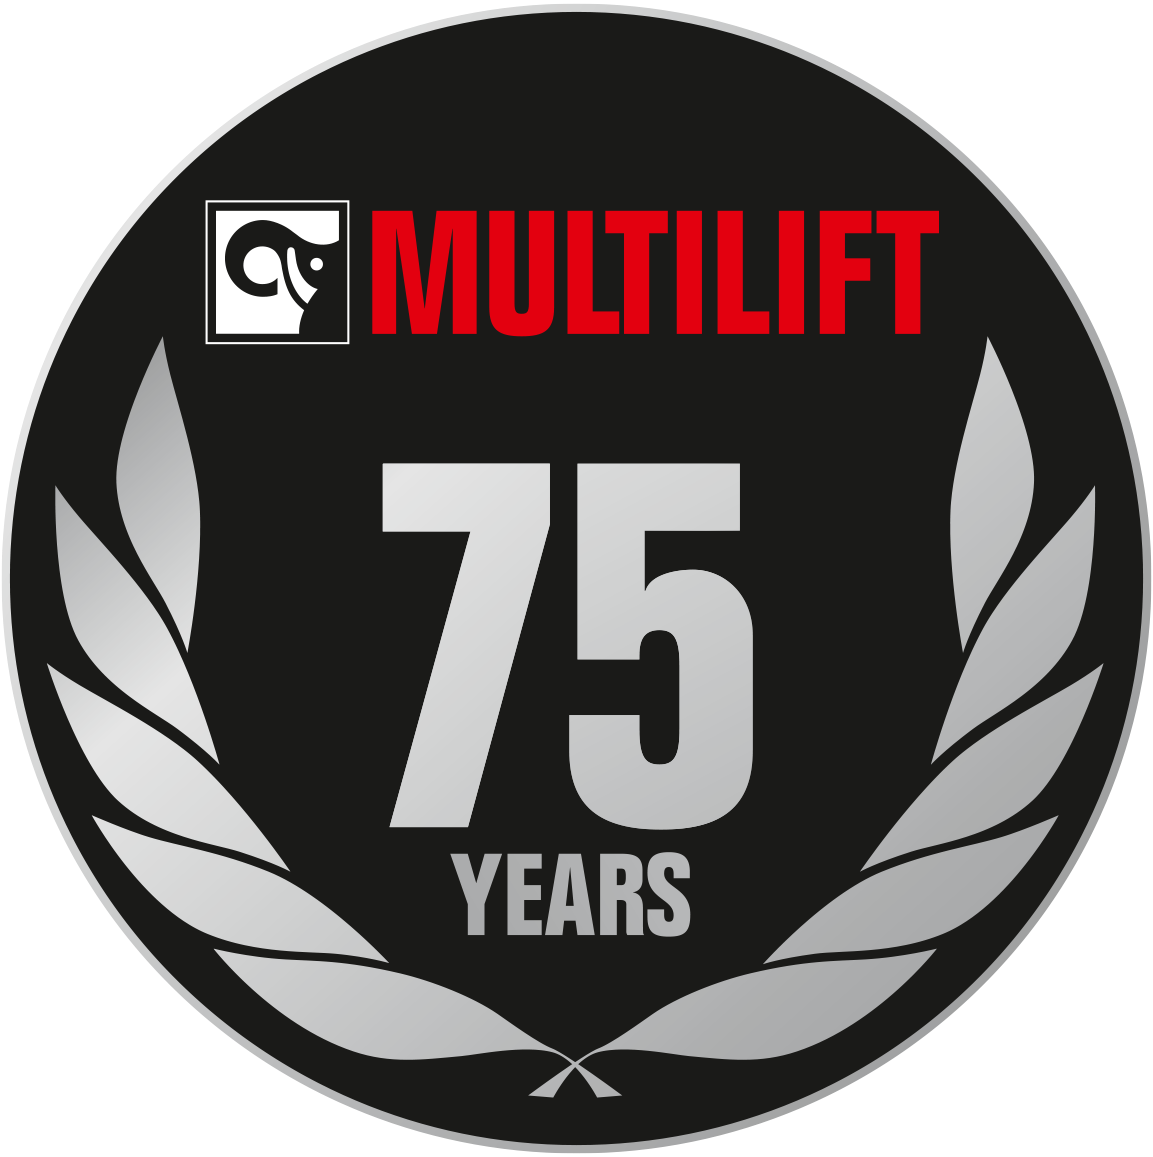 Multilift 75 years banner image